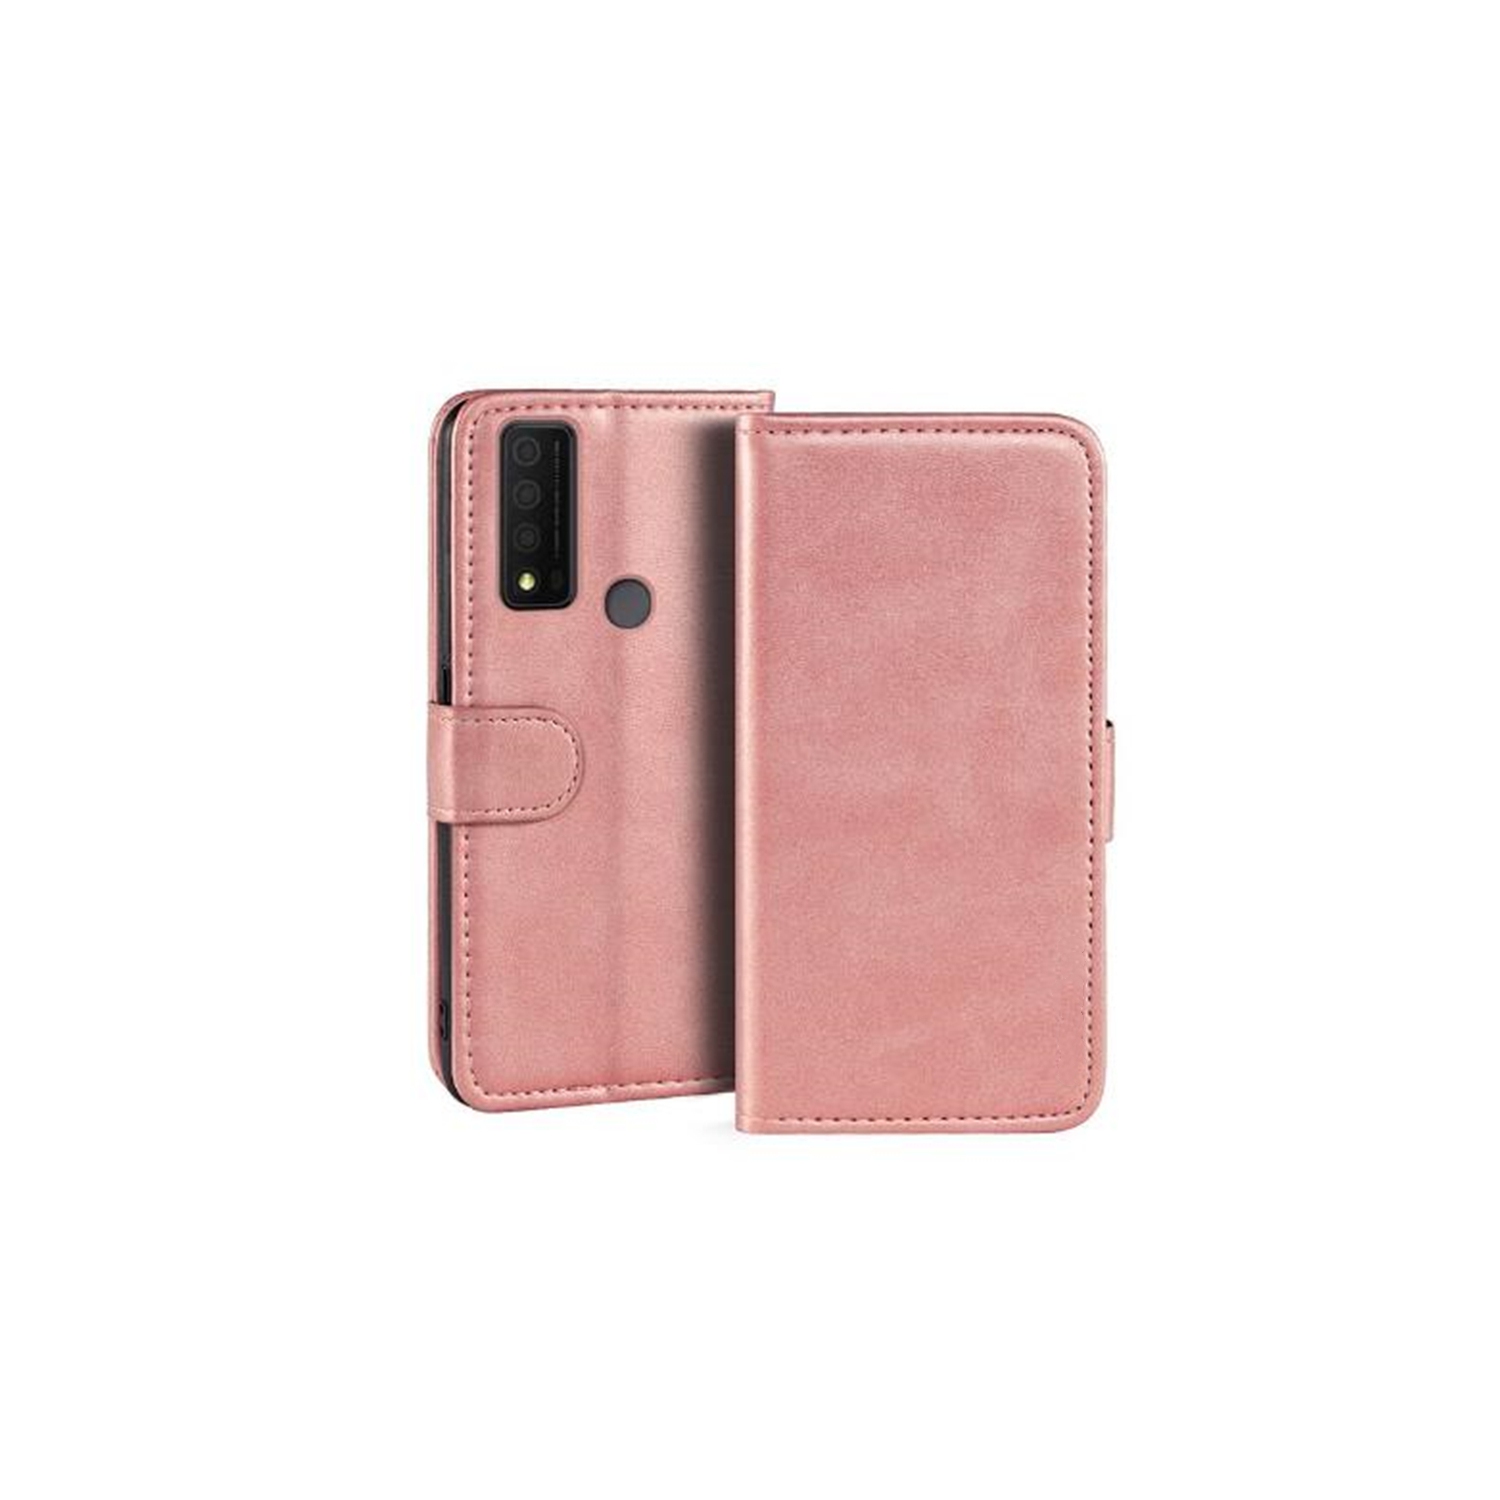 [CS] TCL 30 XE 5G Case, Magnetic Leather Folio Wallet Flip Case Cover with Card Slot, Rose Gold